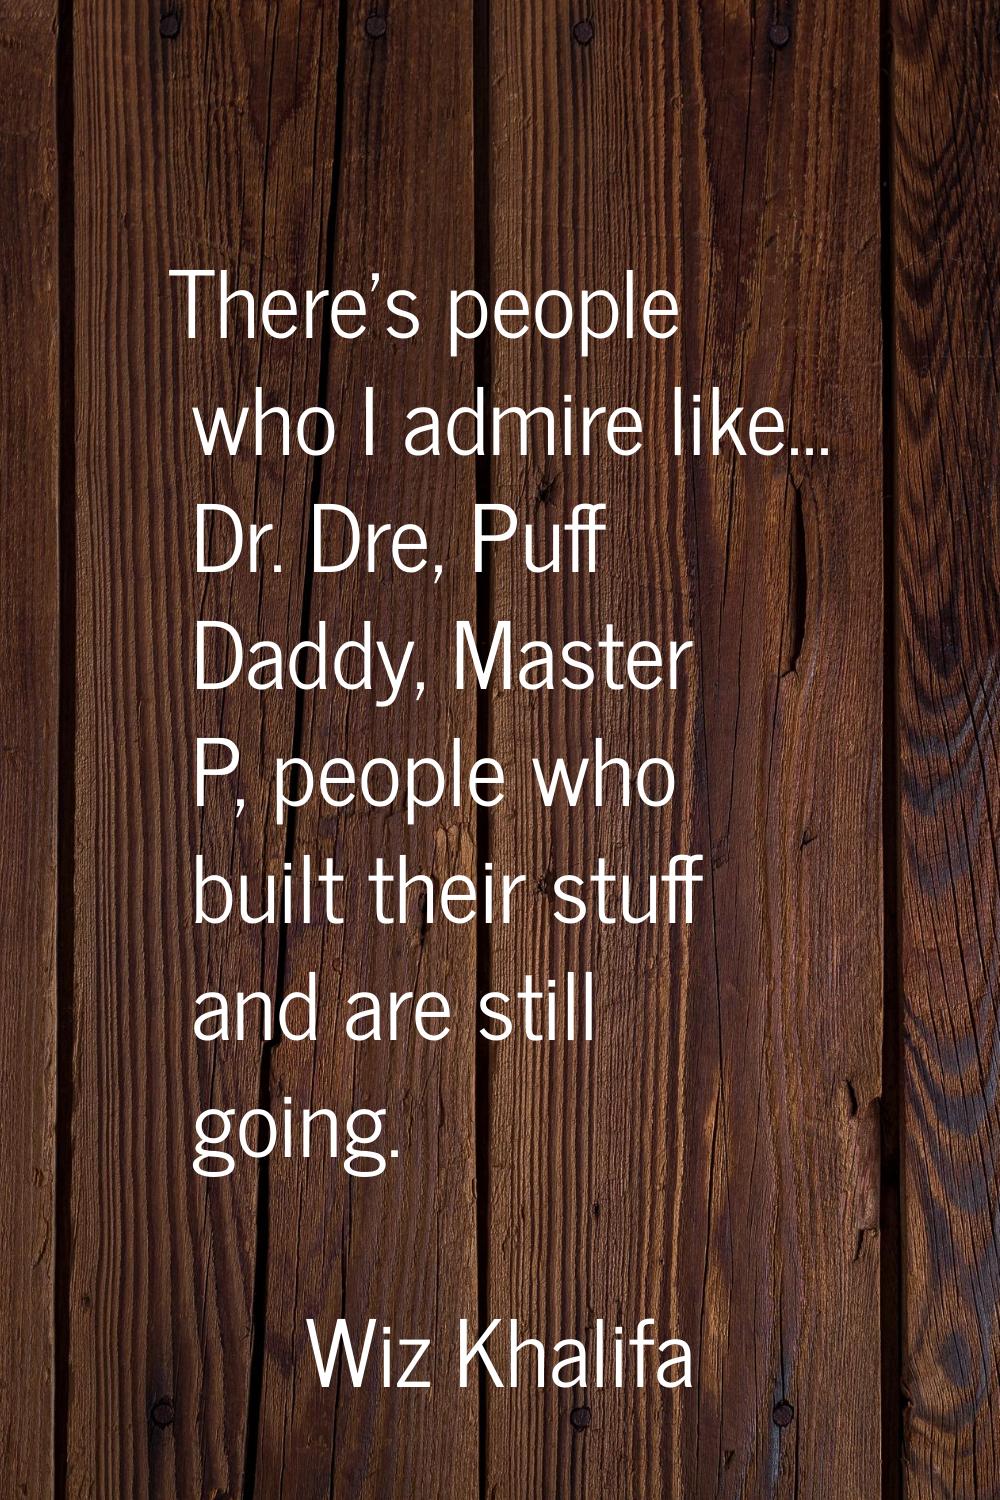 There's people who I admire like... Dr. Dre, Puff Daddy, Master P, people who built their stuff and